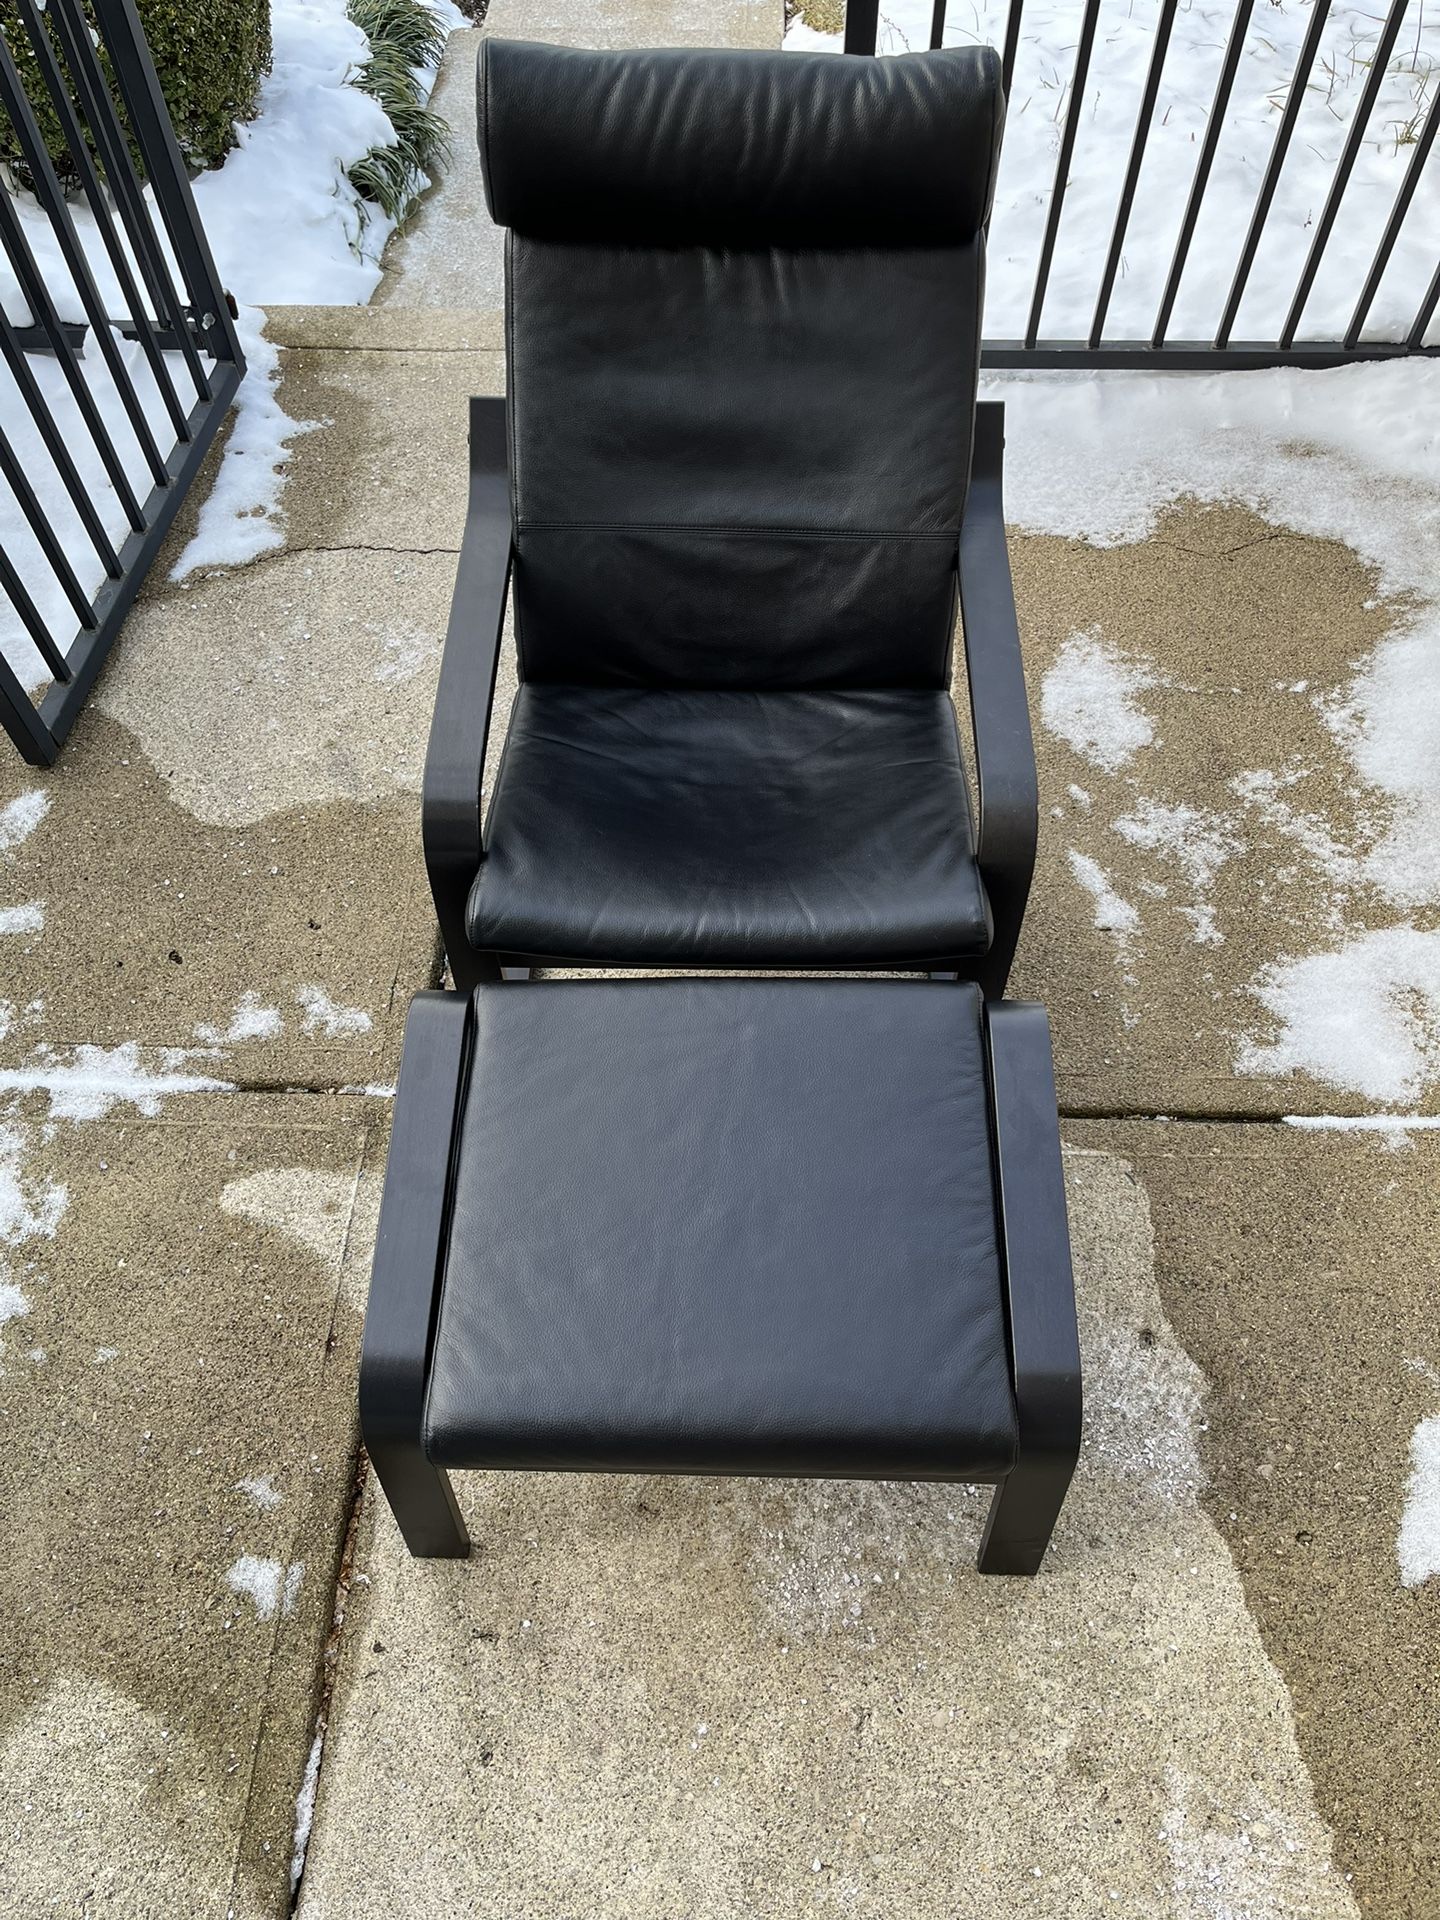 Armchair And Ottoman Best Offer